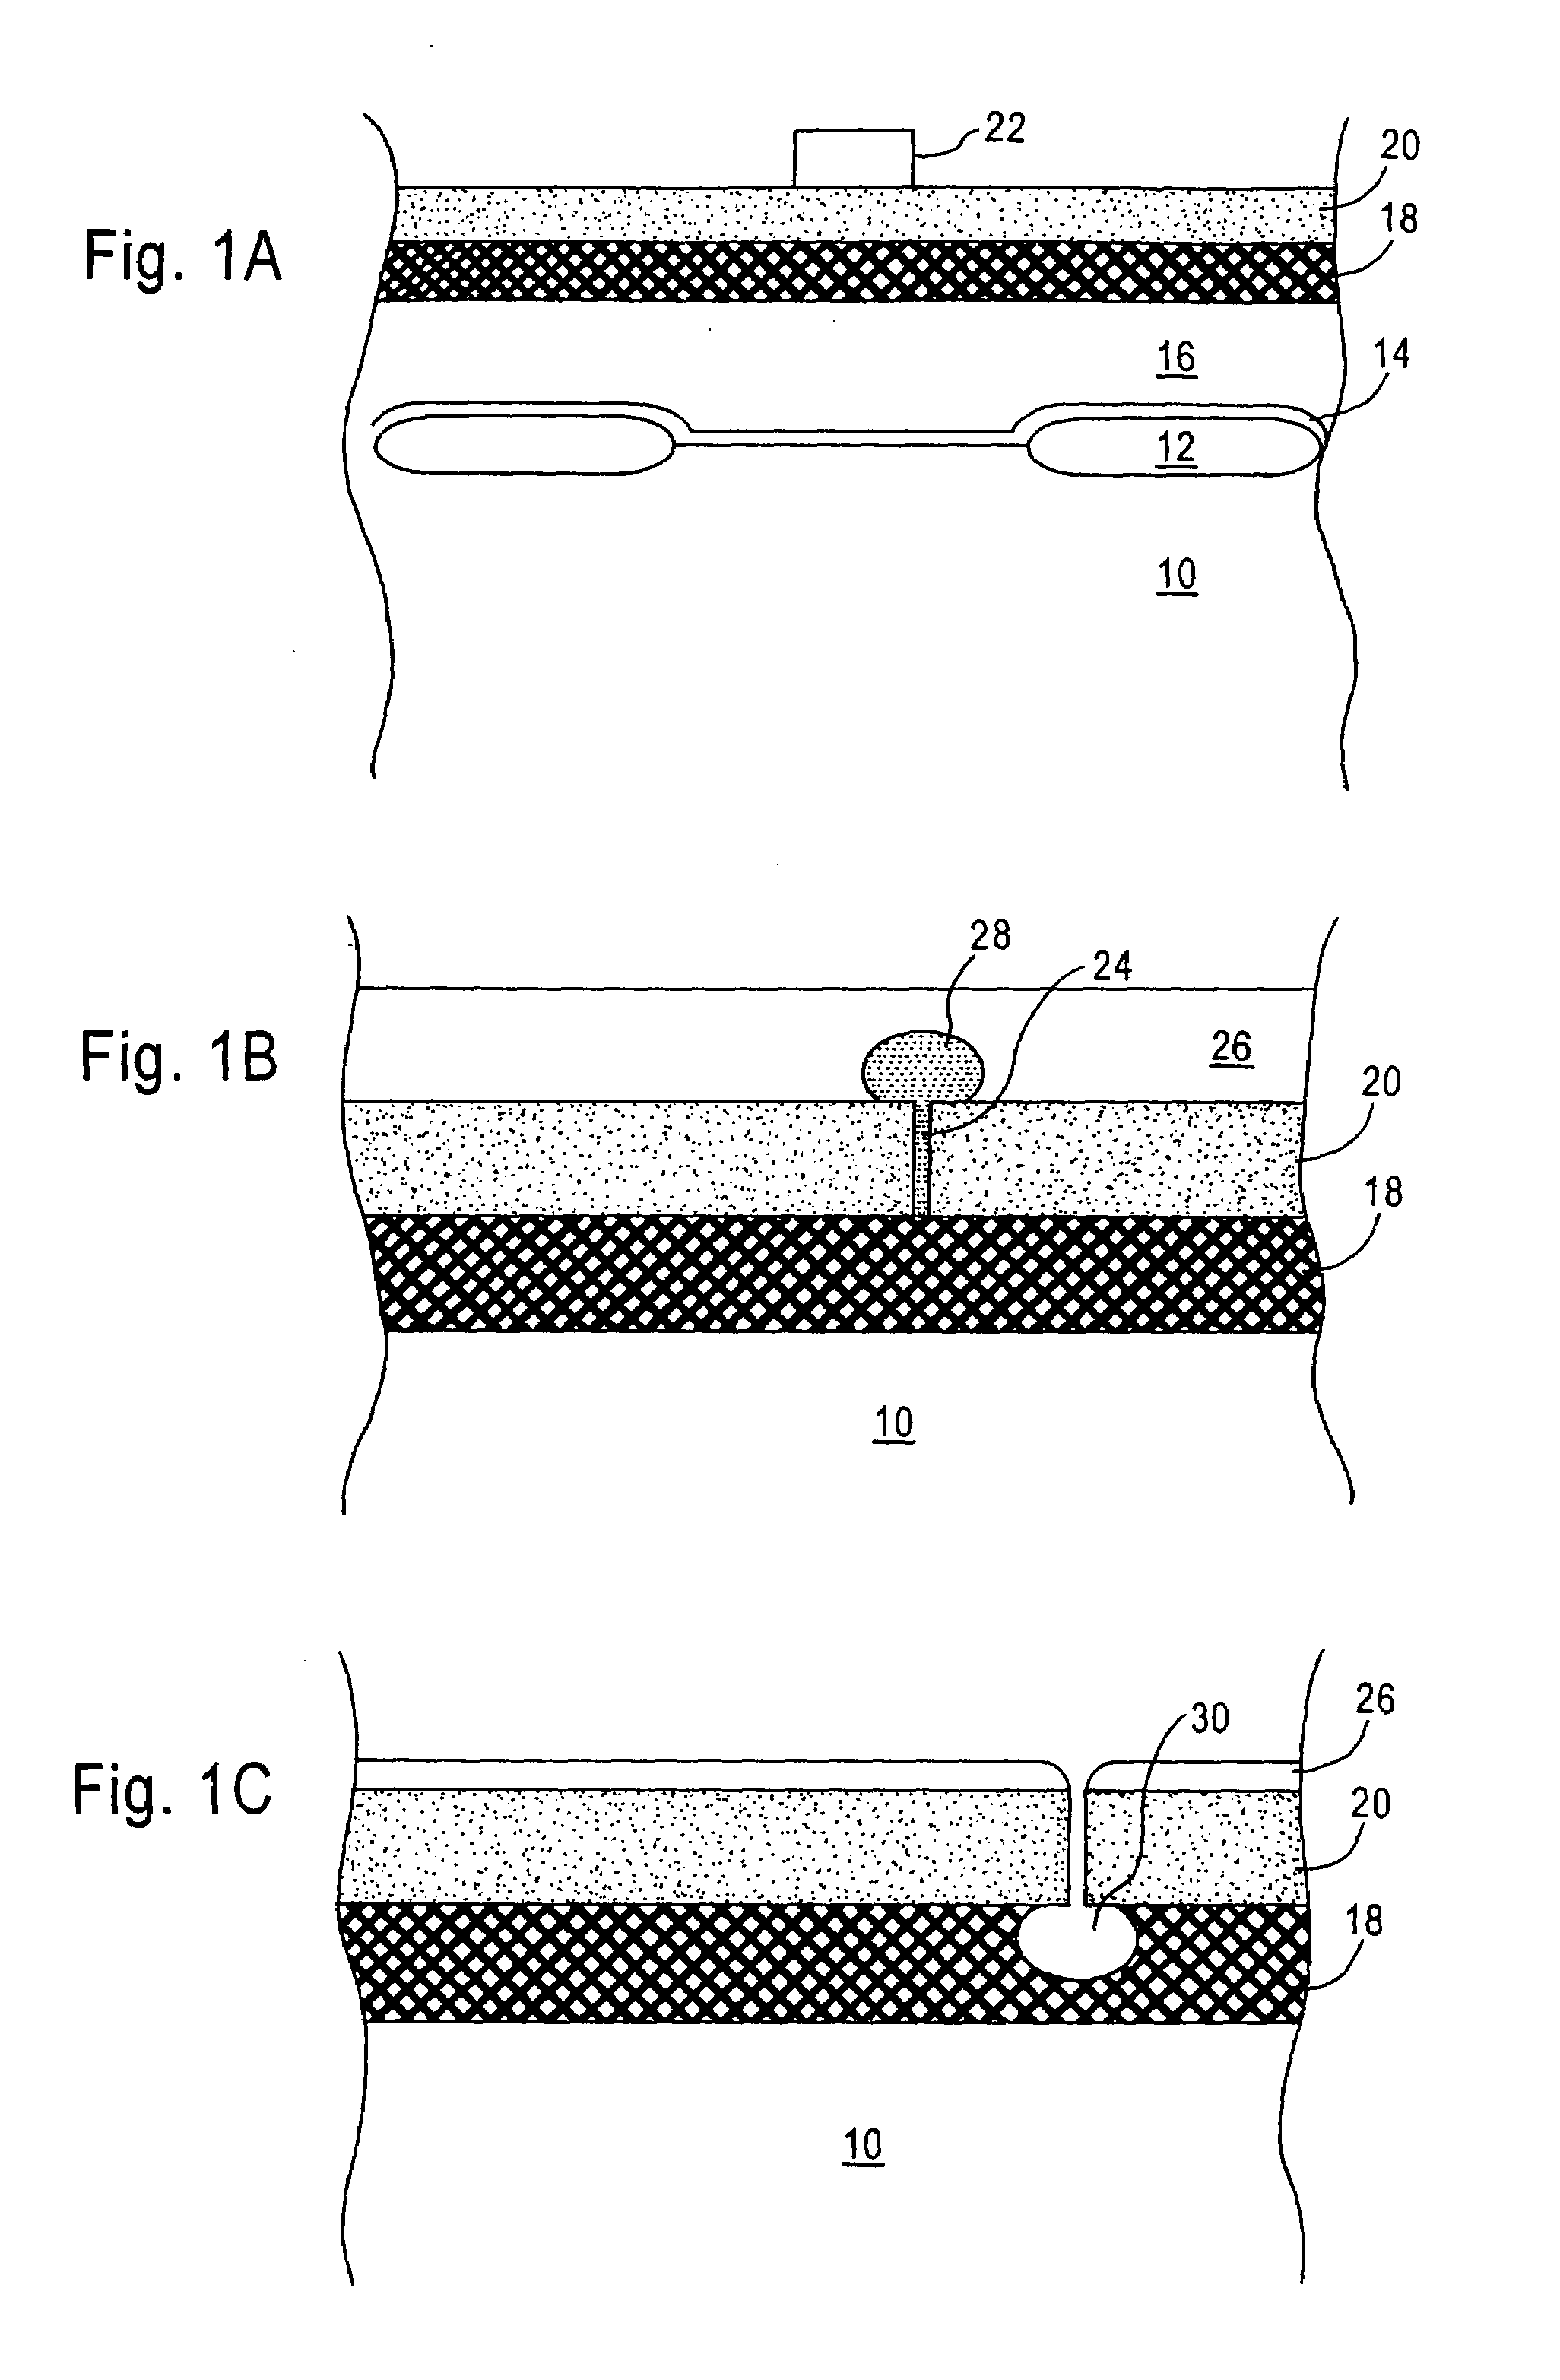 Multi-chamber deposition of silicon oxynitride film for patterning